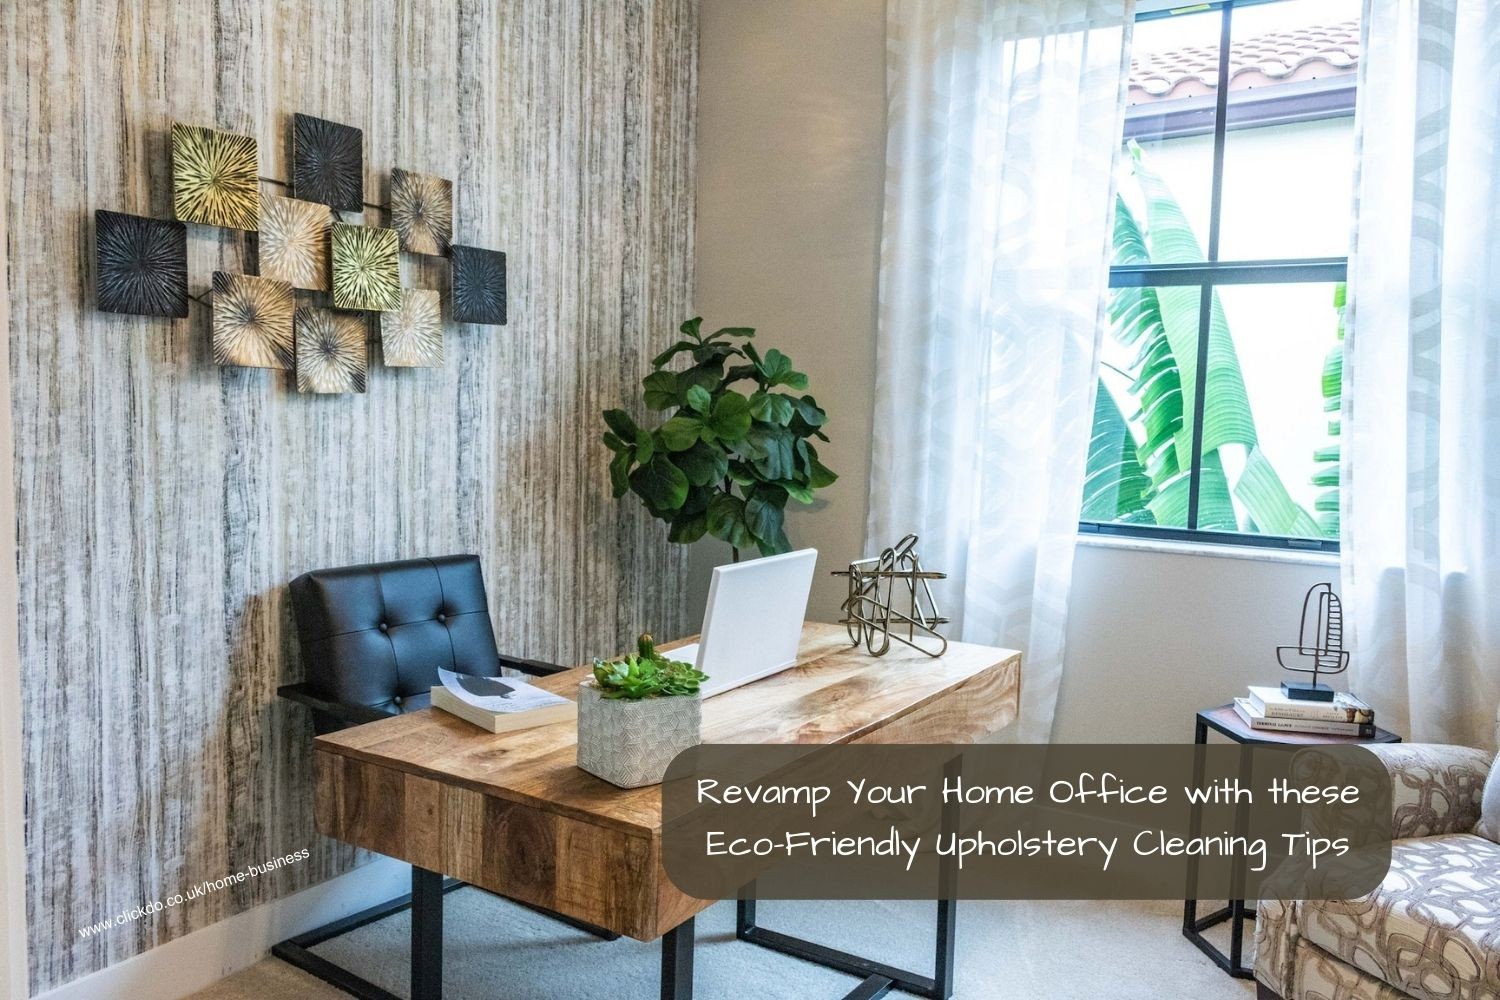 ecofriendly-upholstery-cleaning-tips-for-home-office